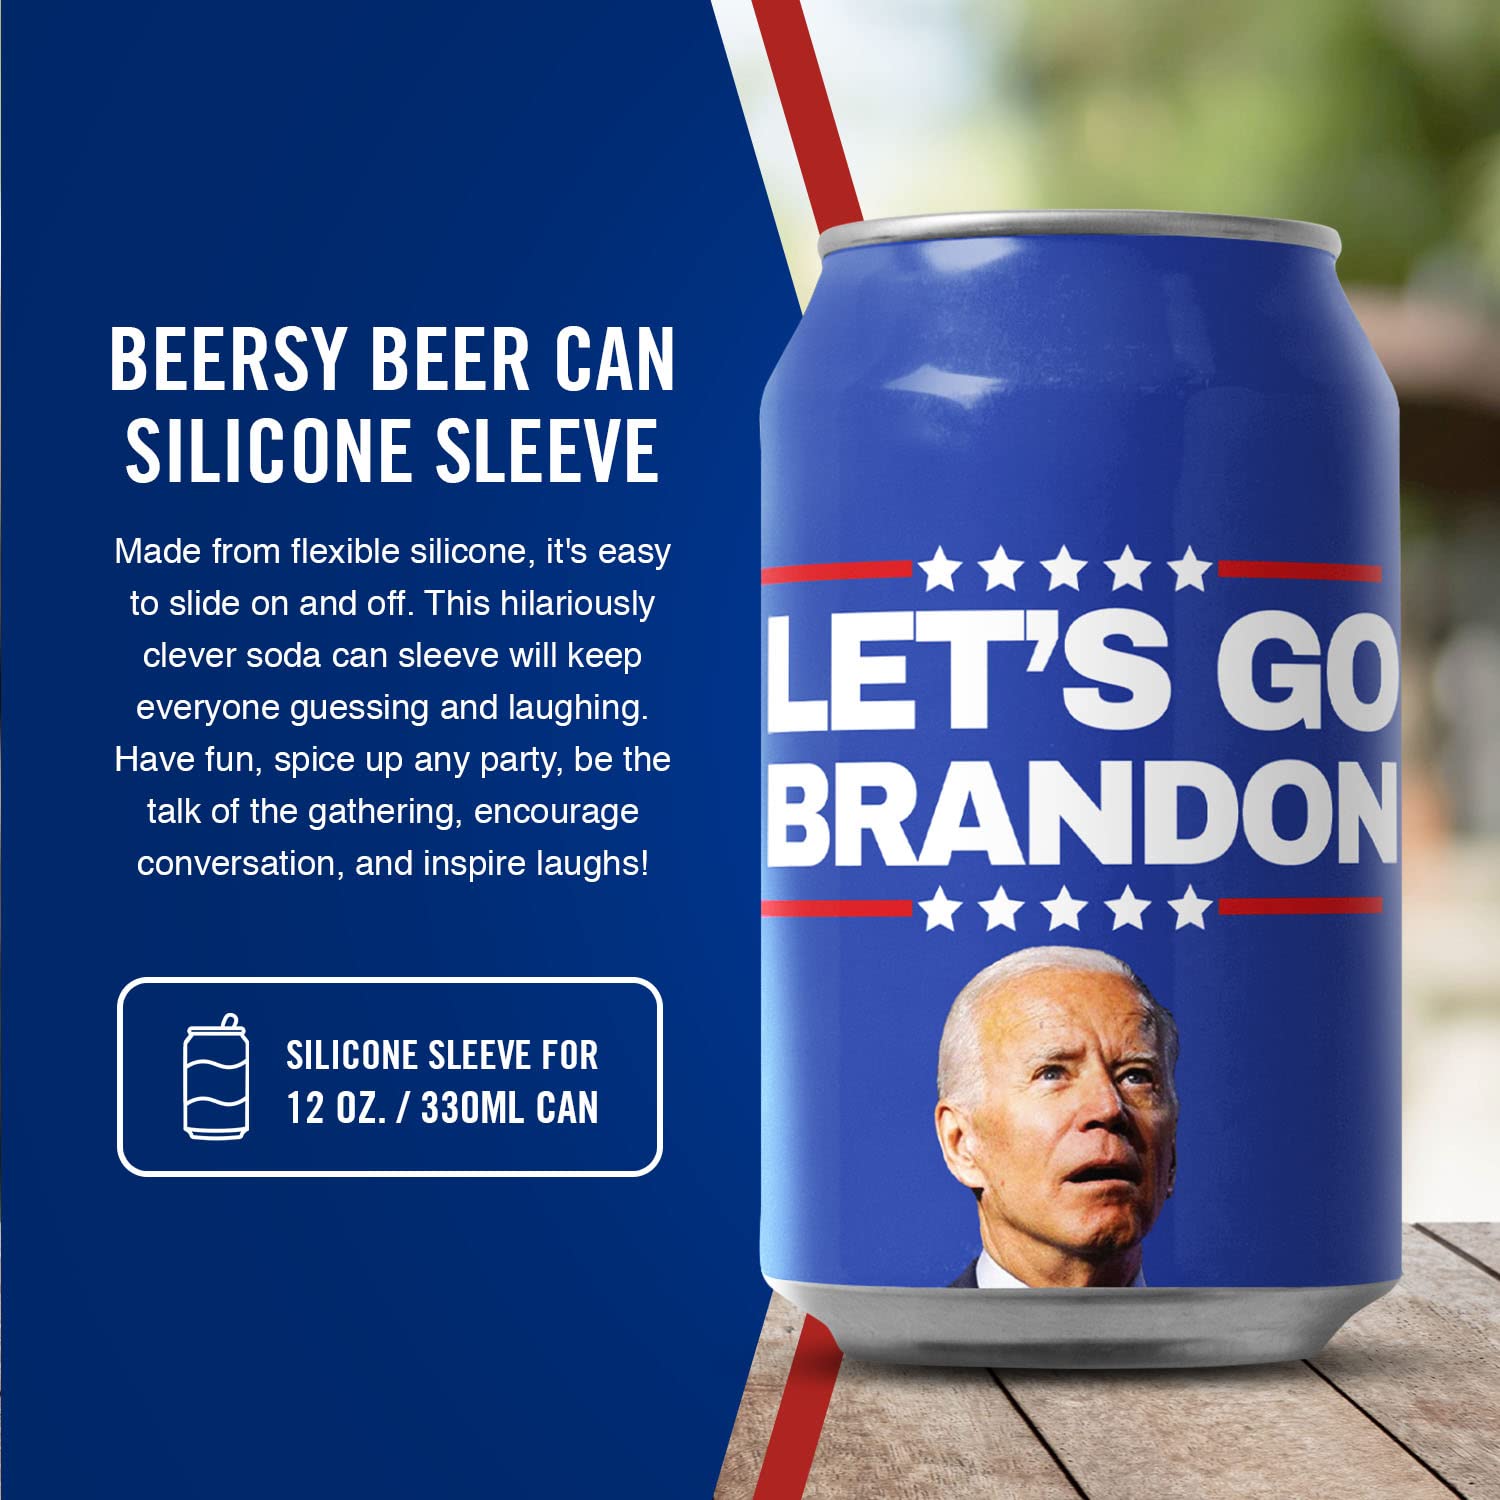 Beersy Silicone Sleeve Beer Can Cover - Insulated Can Sleeve - Novelty Disguise for Outdoor Events, Golf, Parties, Concerts,Tailgates - Hide a Beer To Look Like Soda, Fits 12 oz Cans (Lets Go Brandon)